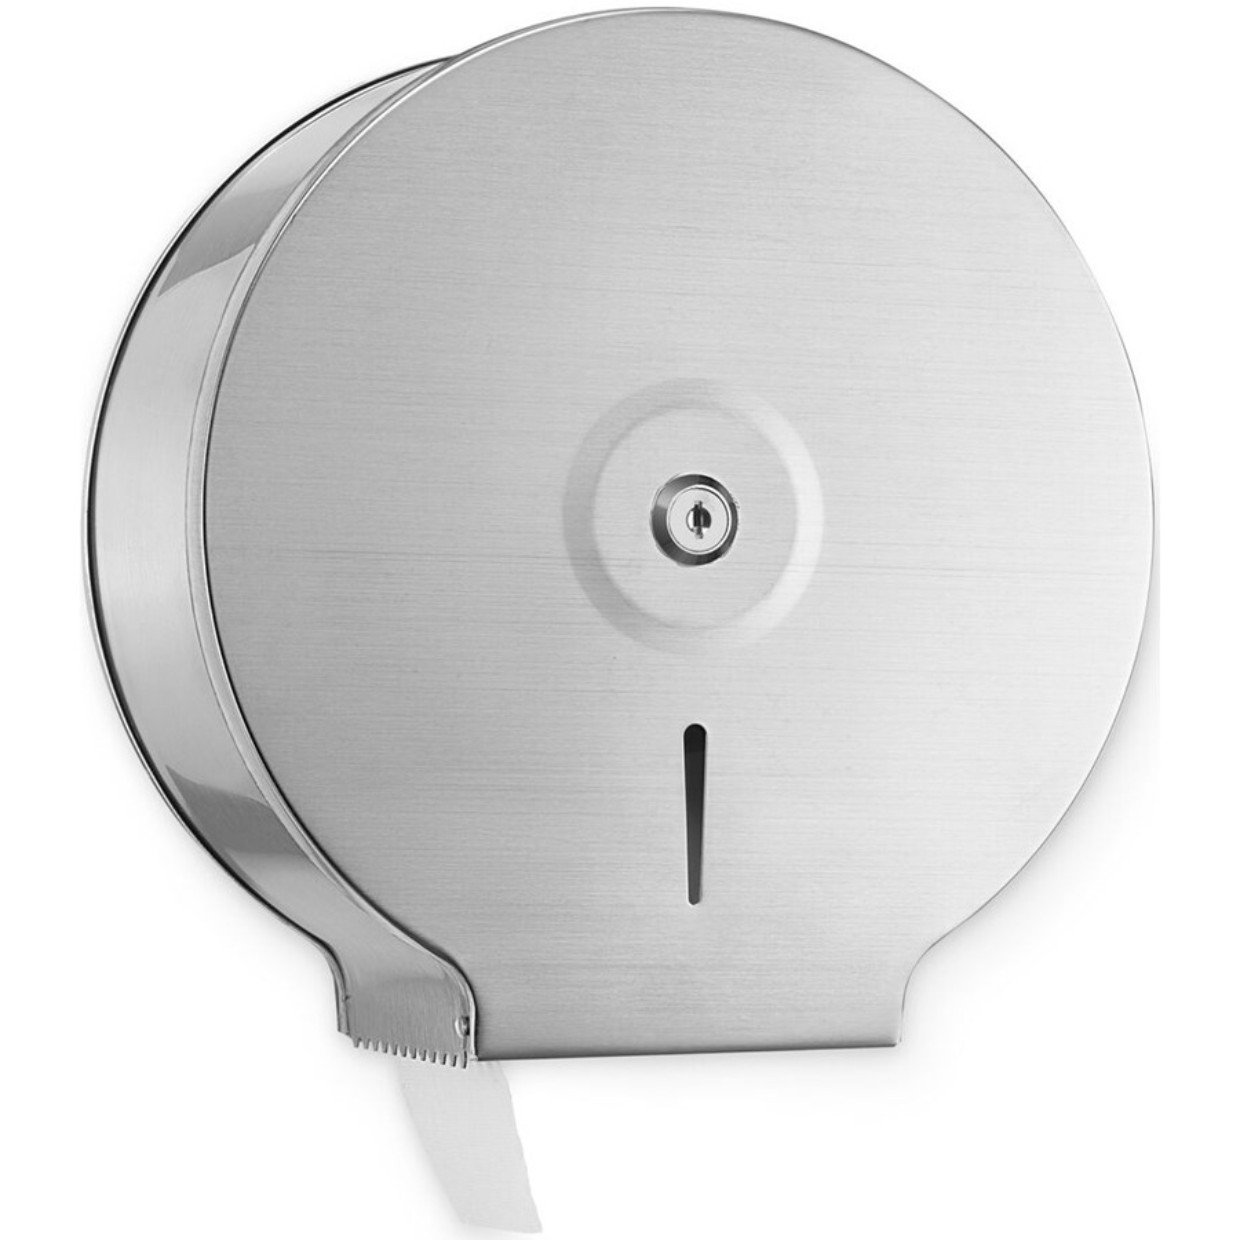 Stainless Steel Jumbo Toilet Tissue Dispenser Steel Jumbo Toilet Tissue Dispenser is perfect for high traffic restrooms, break rooms, food service facilities, healthcare facilities and the like. This tissue dispenser can accommodate any brand of nine-inch jumbo tissue with a minimum 2.5-inch core diameter. Its rounded top prevents the dispenser from being used as a shelf to minimise abuse and extend the product’s life.